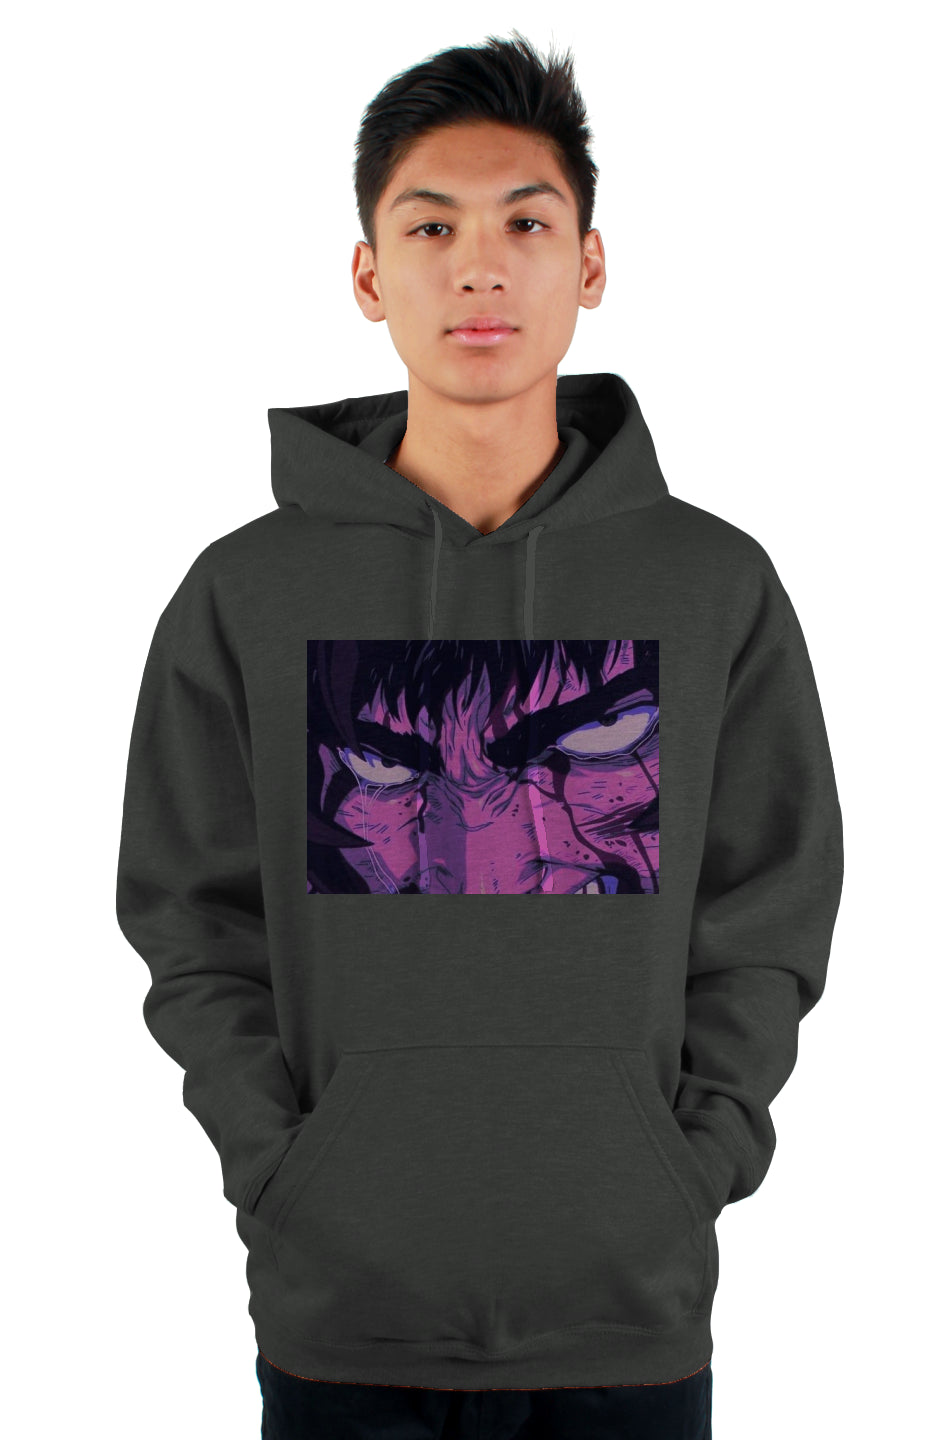 Guts Crying Stare Hoodie